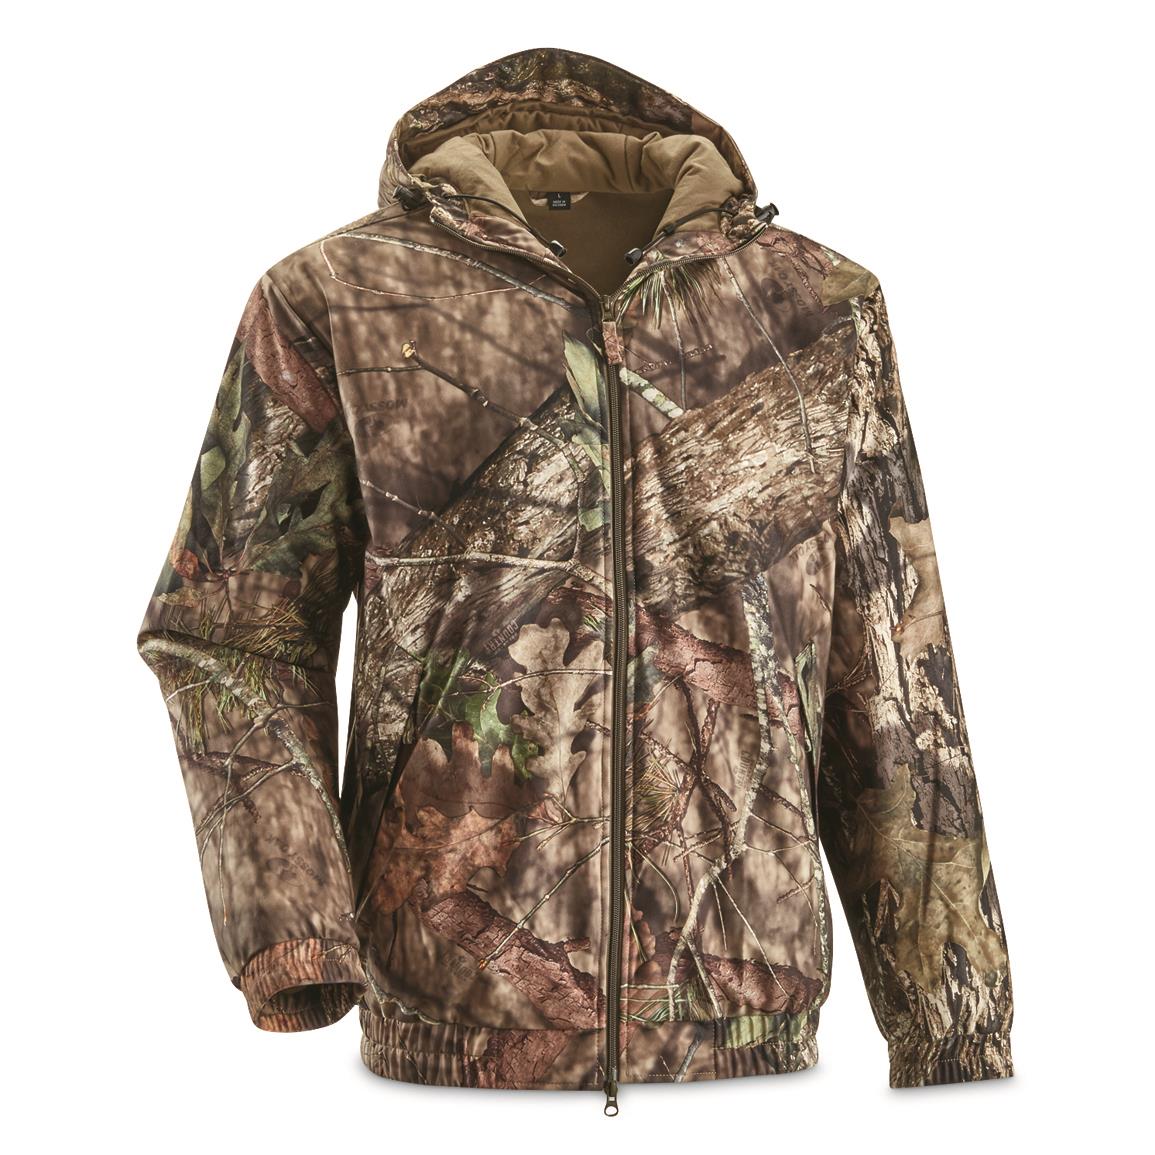 Jacket Camouflage Size S Shooting Hunting Fishing Waterproof And Warmth 